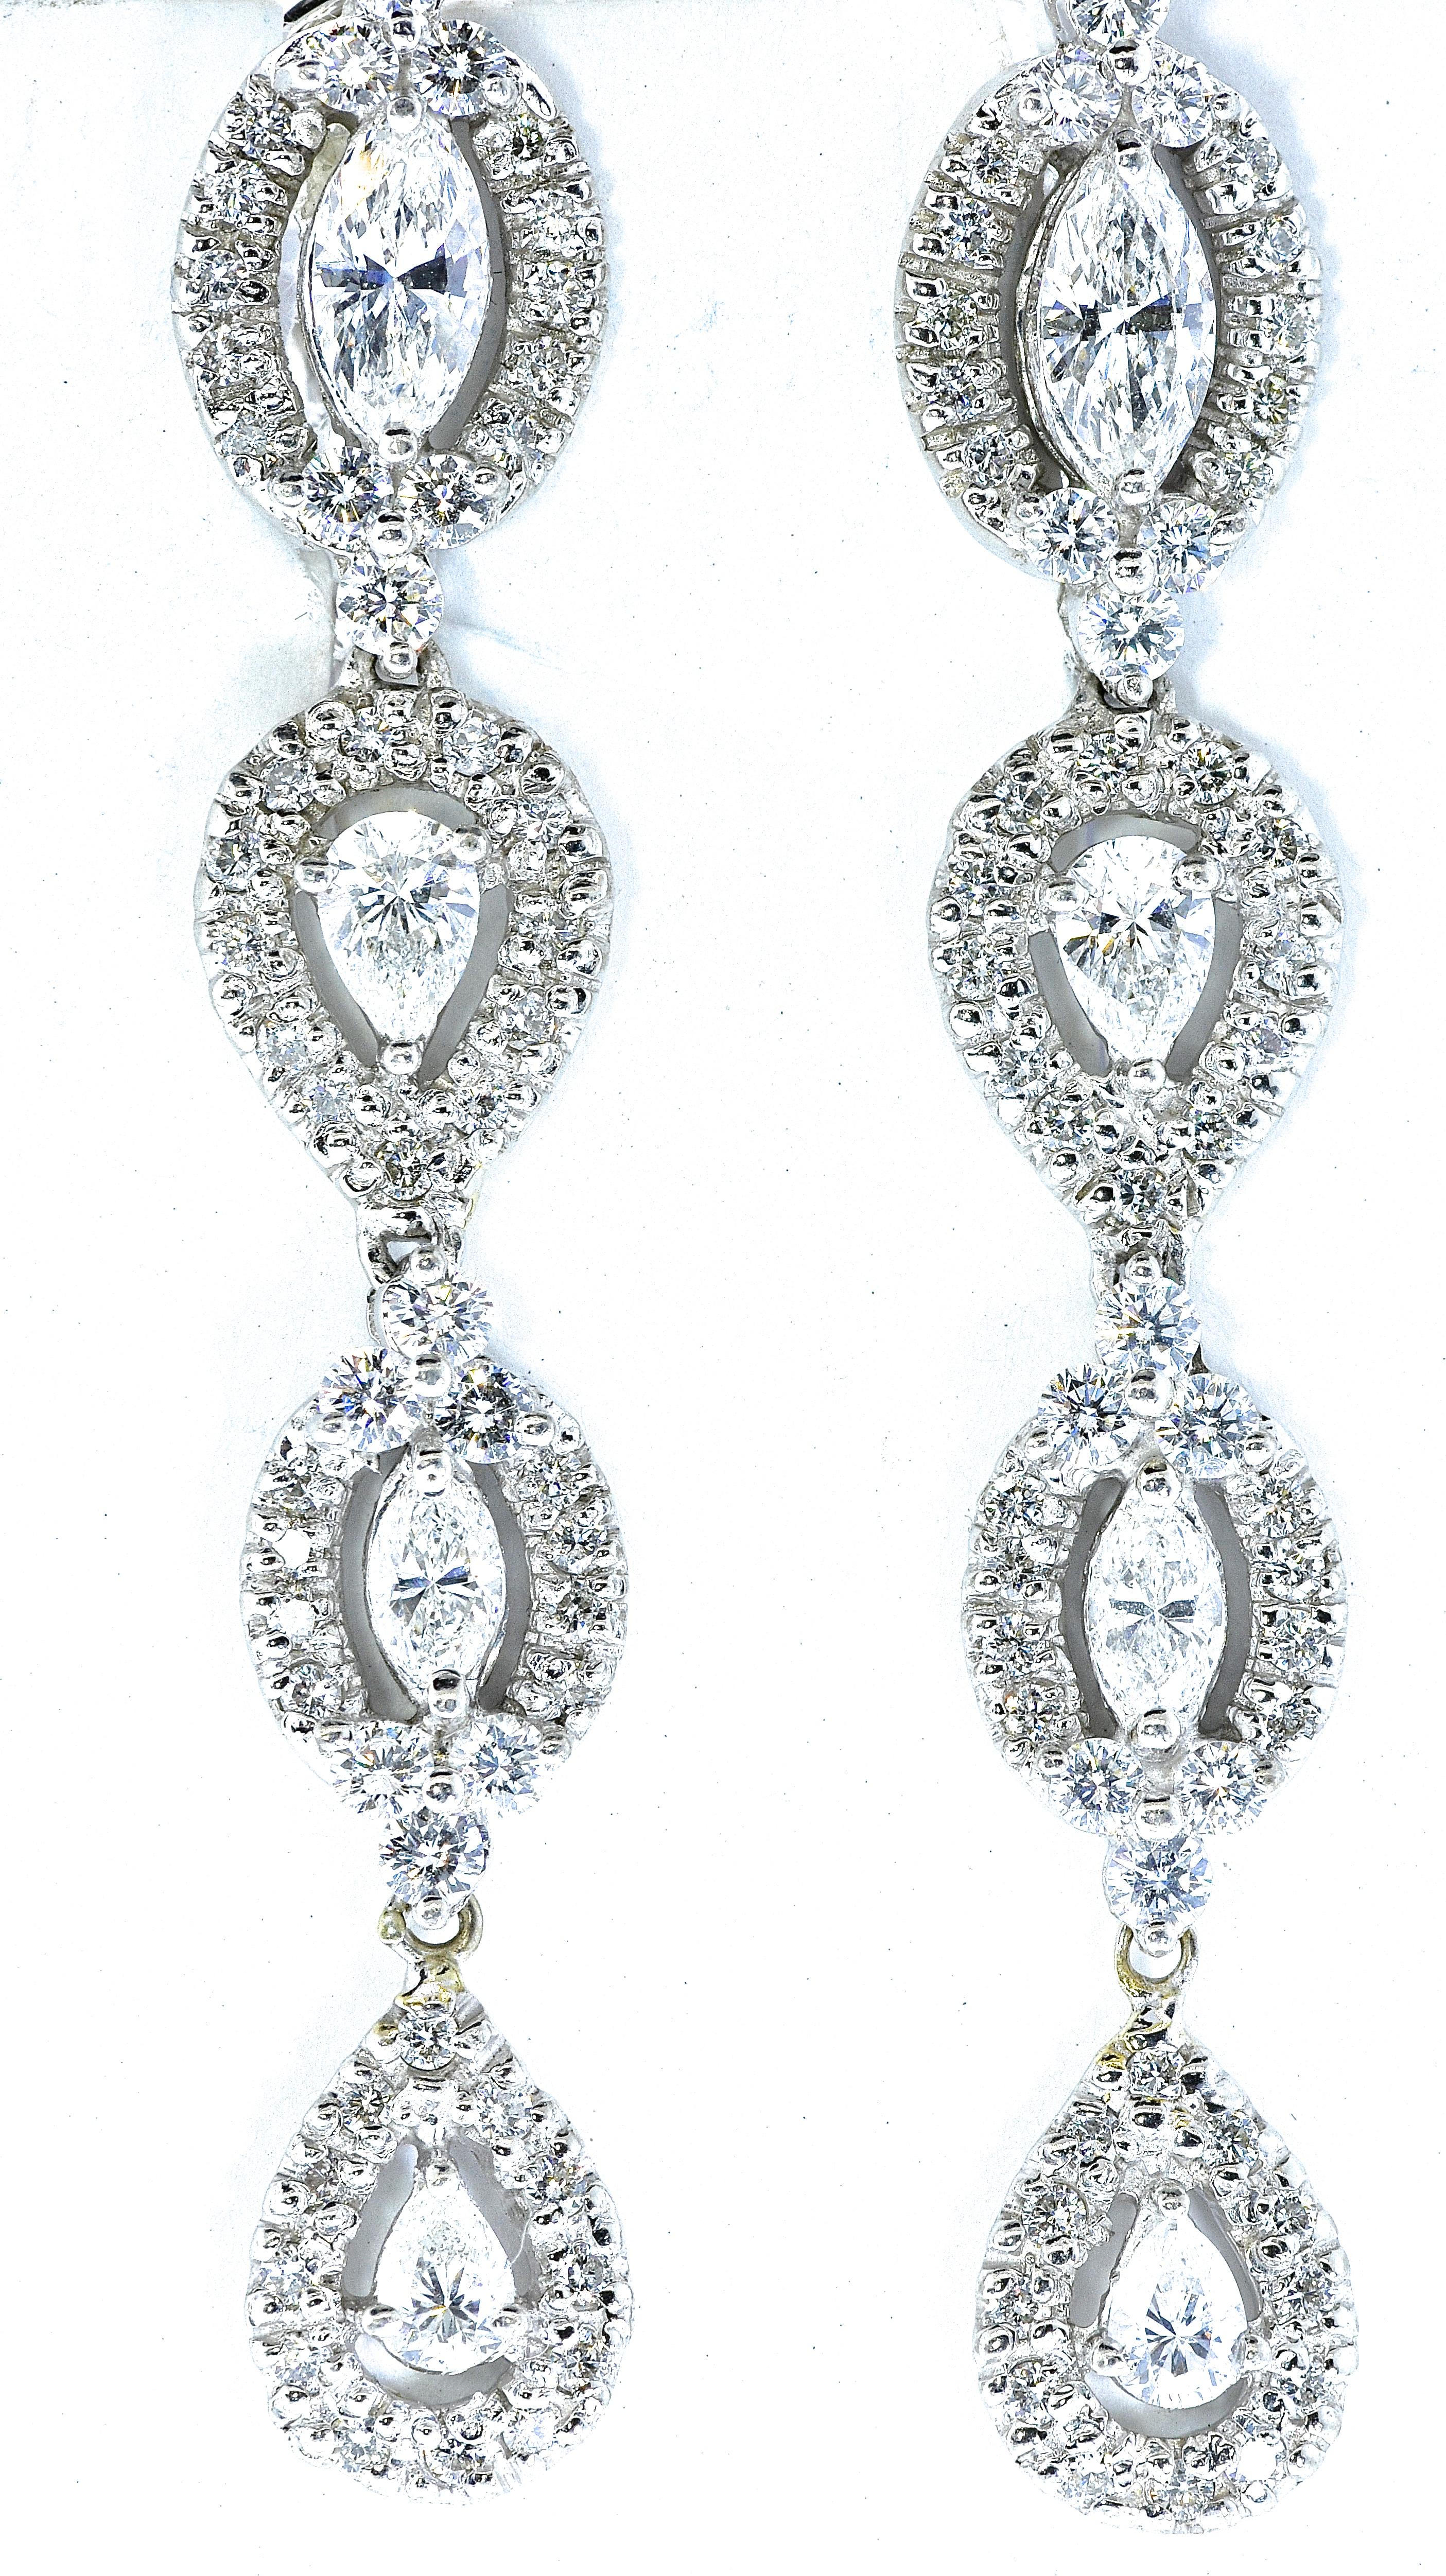 Diamond earrings possess fine white well cut and well matched diamonds -  well cut and very white (G/H,VS).  There are approximately 3.2 cts. of round, pear and marquis cut diamonds set in 18K white gold.  These earrings are two inches long.   They